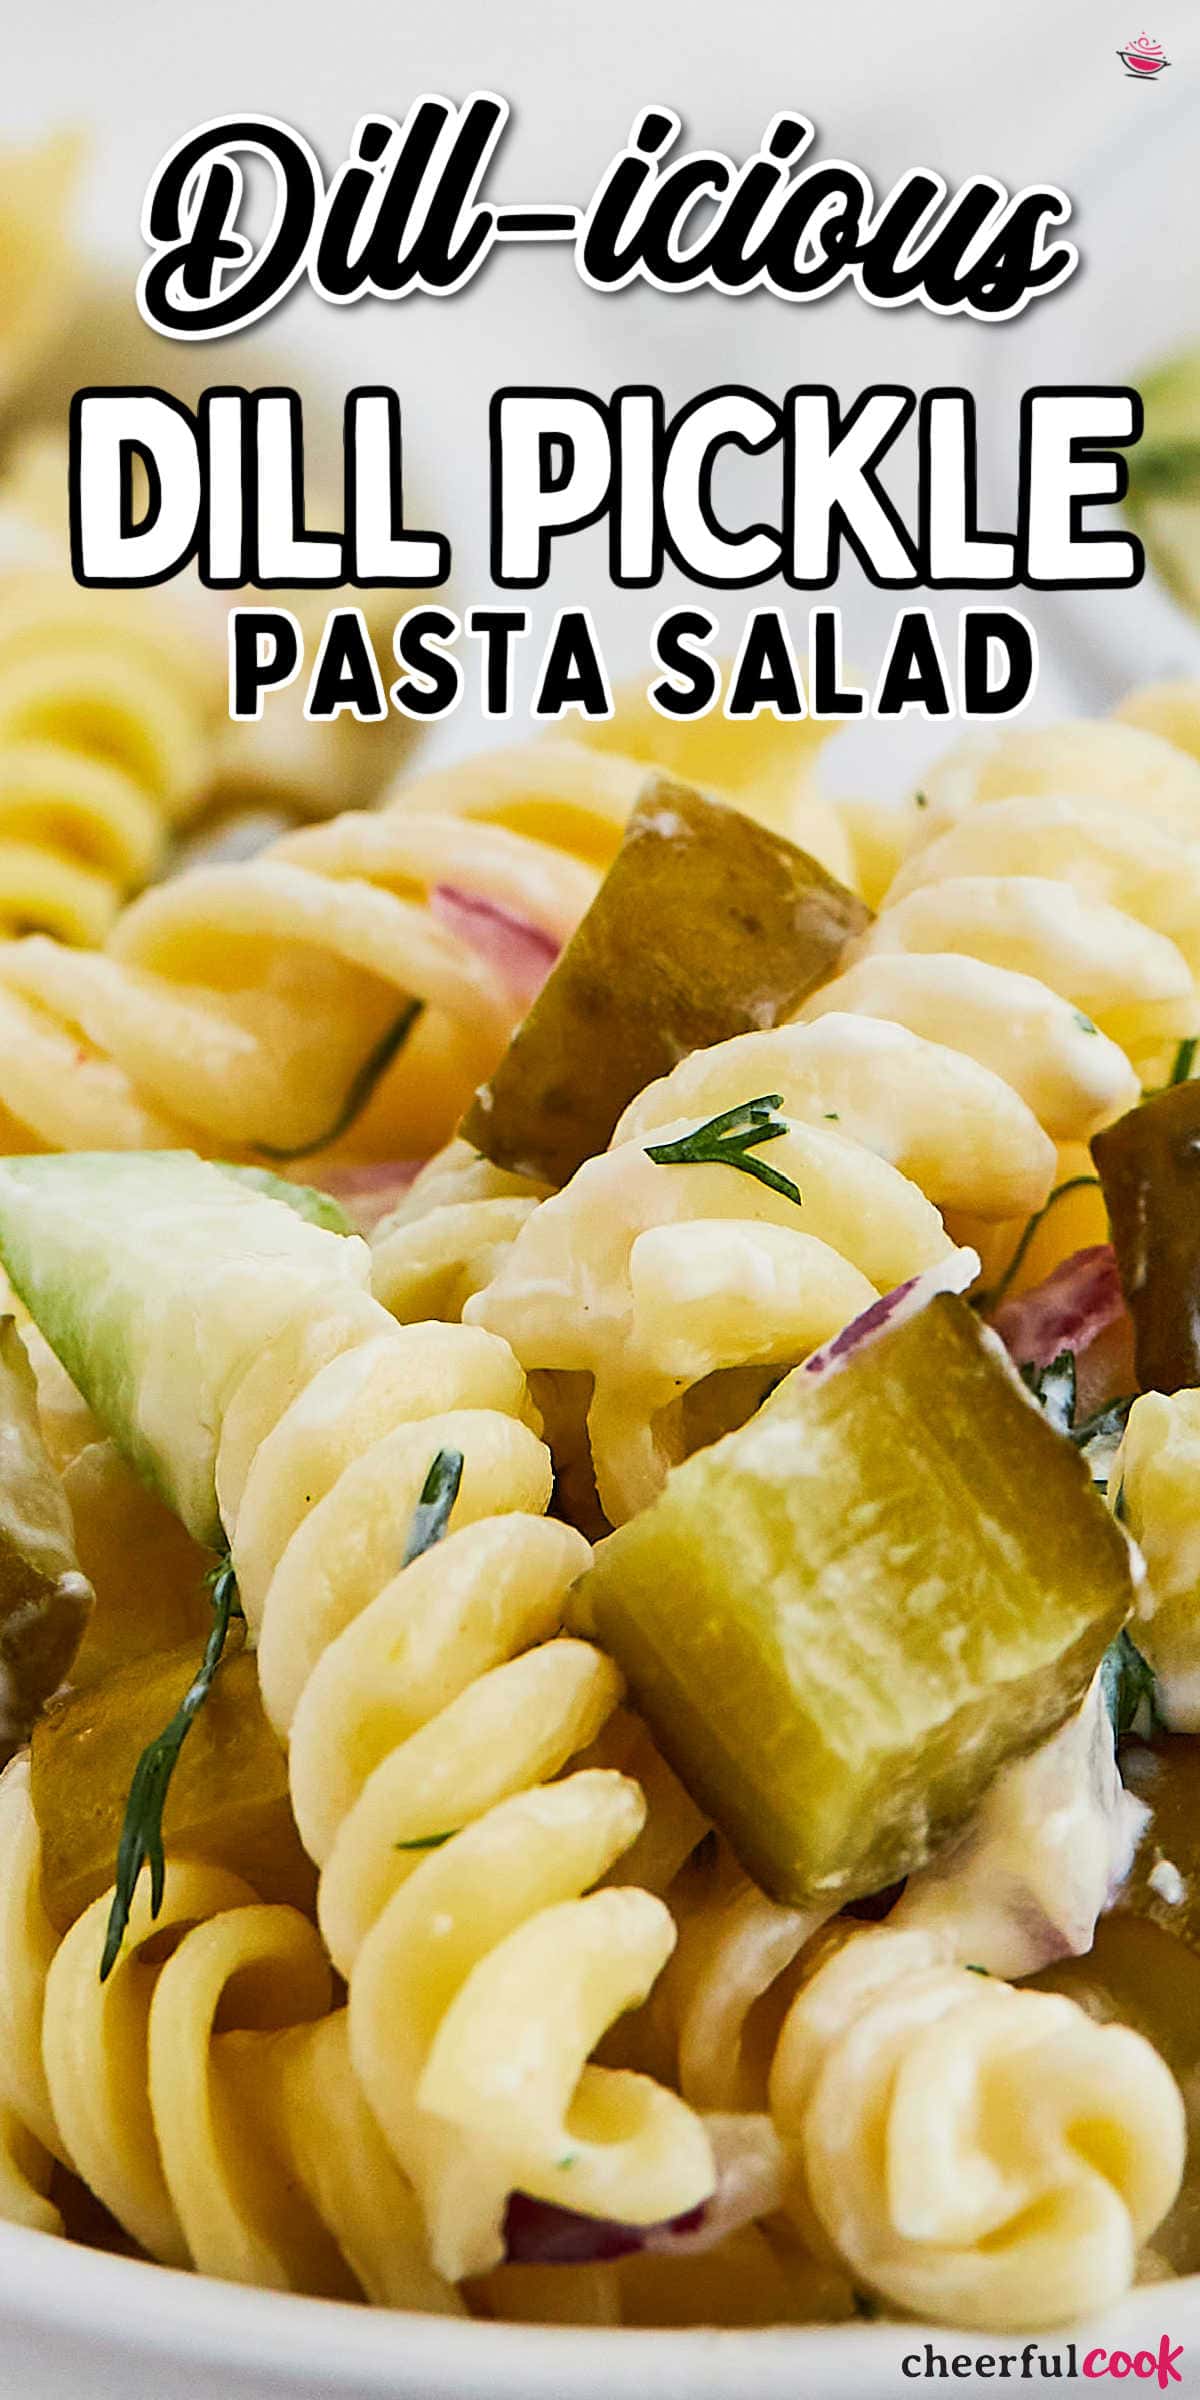 Get ready to satisfy your dill pickle cravings with this creamy and delicious pasta salad recipe! Bursting with tangy dill pickle flavor, this dish is sure to become a new favorite among your friends and family. Perfect for picnics, potlucks, or any occasion that calls for a little bit of fun and cheer, this recipe is quick and easy to prepare, making it a crowd-pleaser for any gathering. #cheerfulcook #dillpickle #pastasalad #yum #potluckideas #easyrecipe via @cheerfulcook